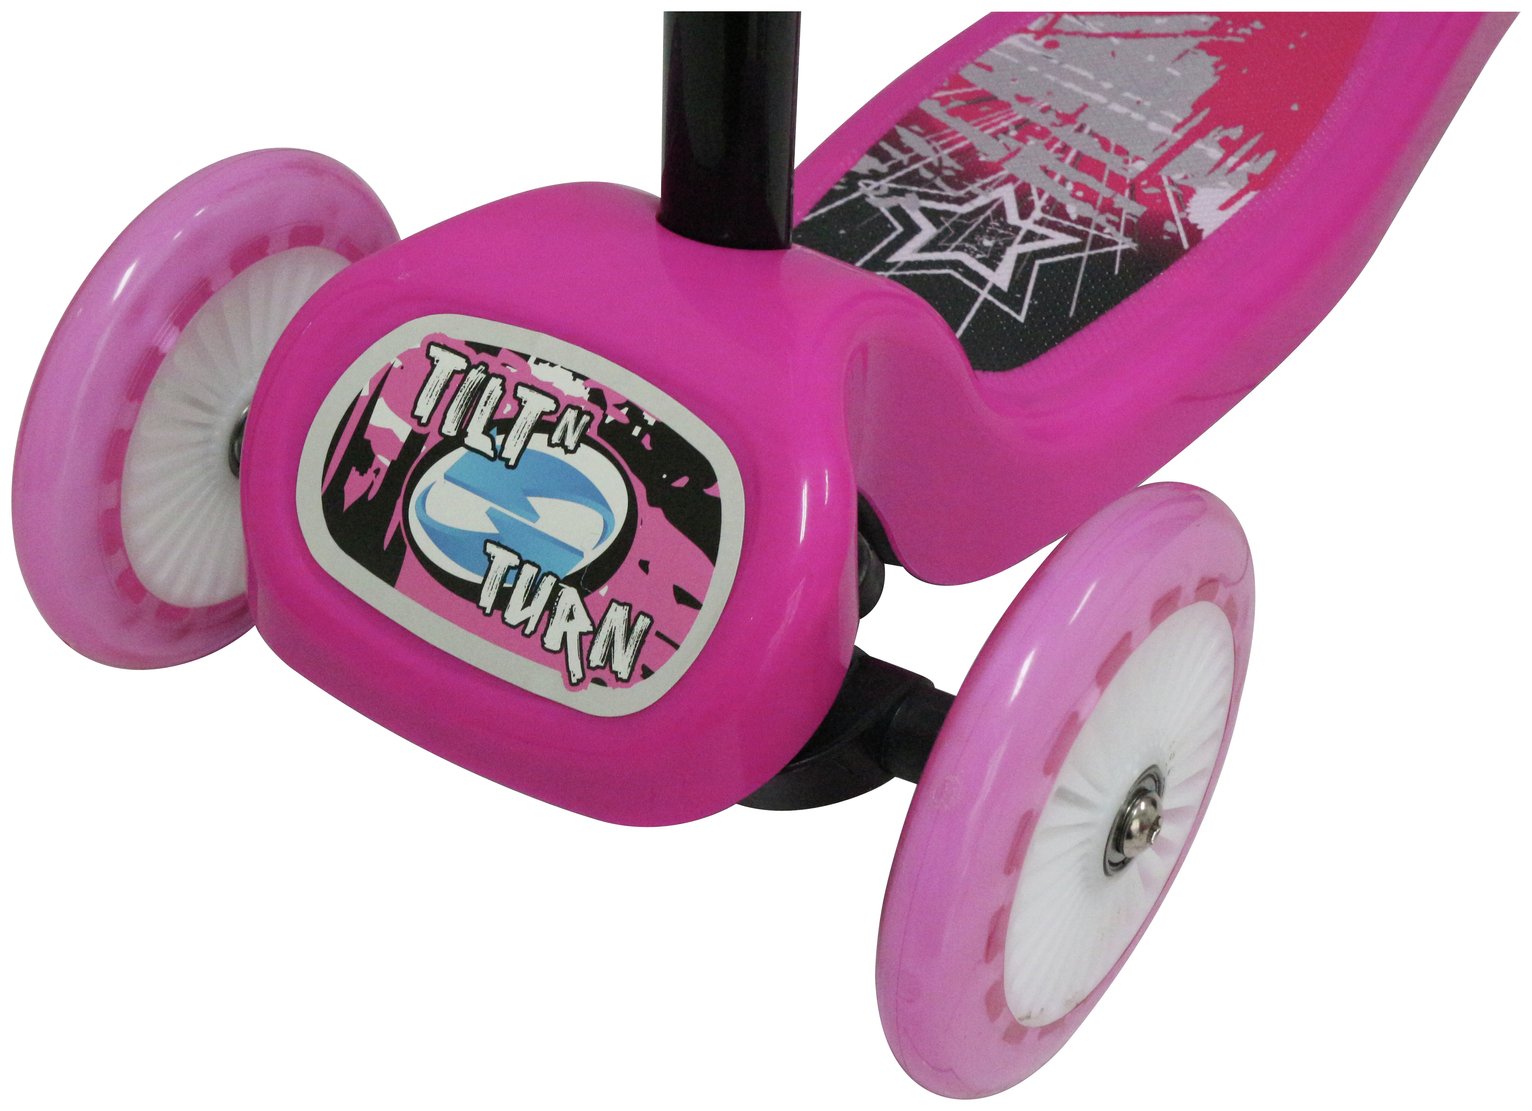 Chad Valley Tilt n Turn Scooter - Pink 